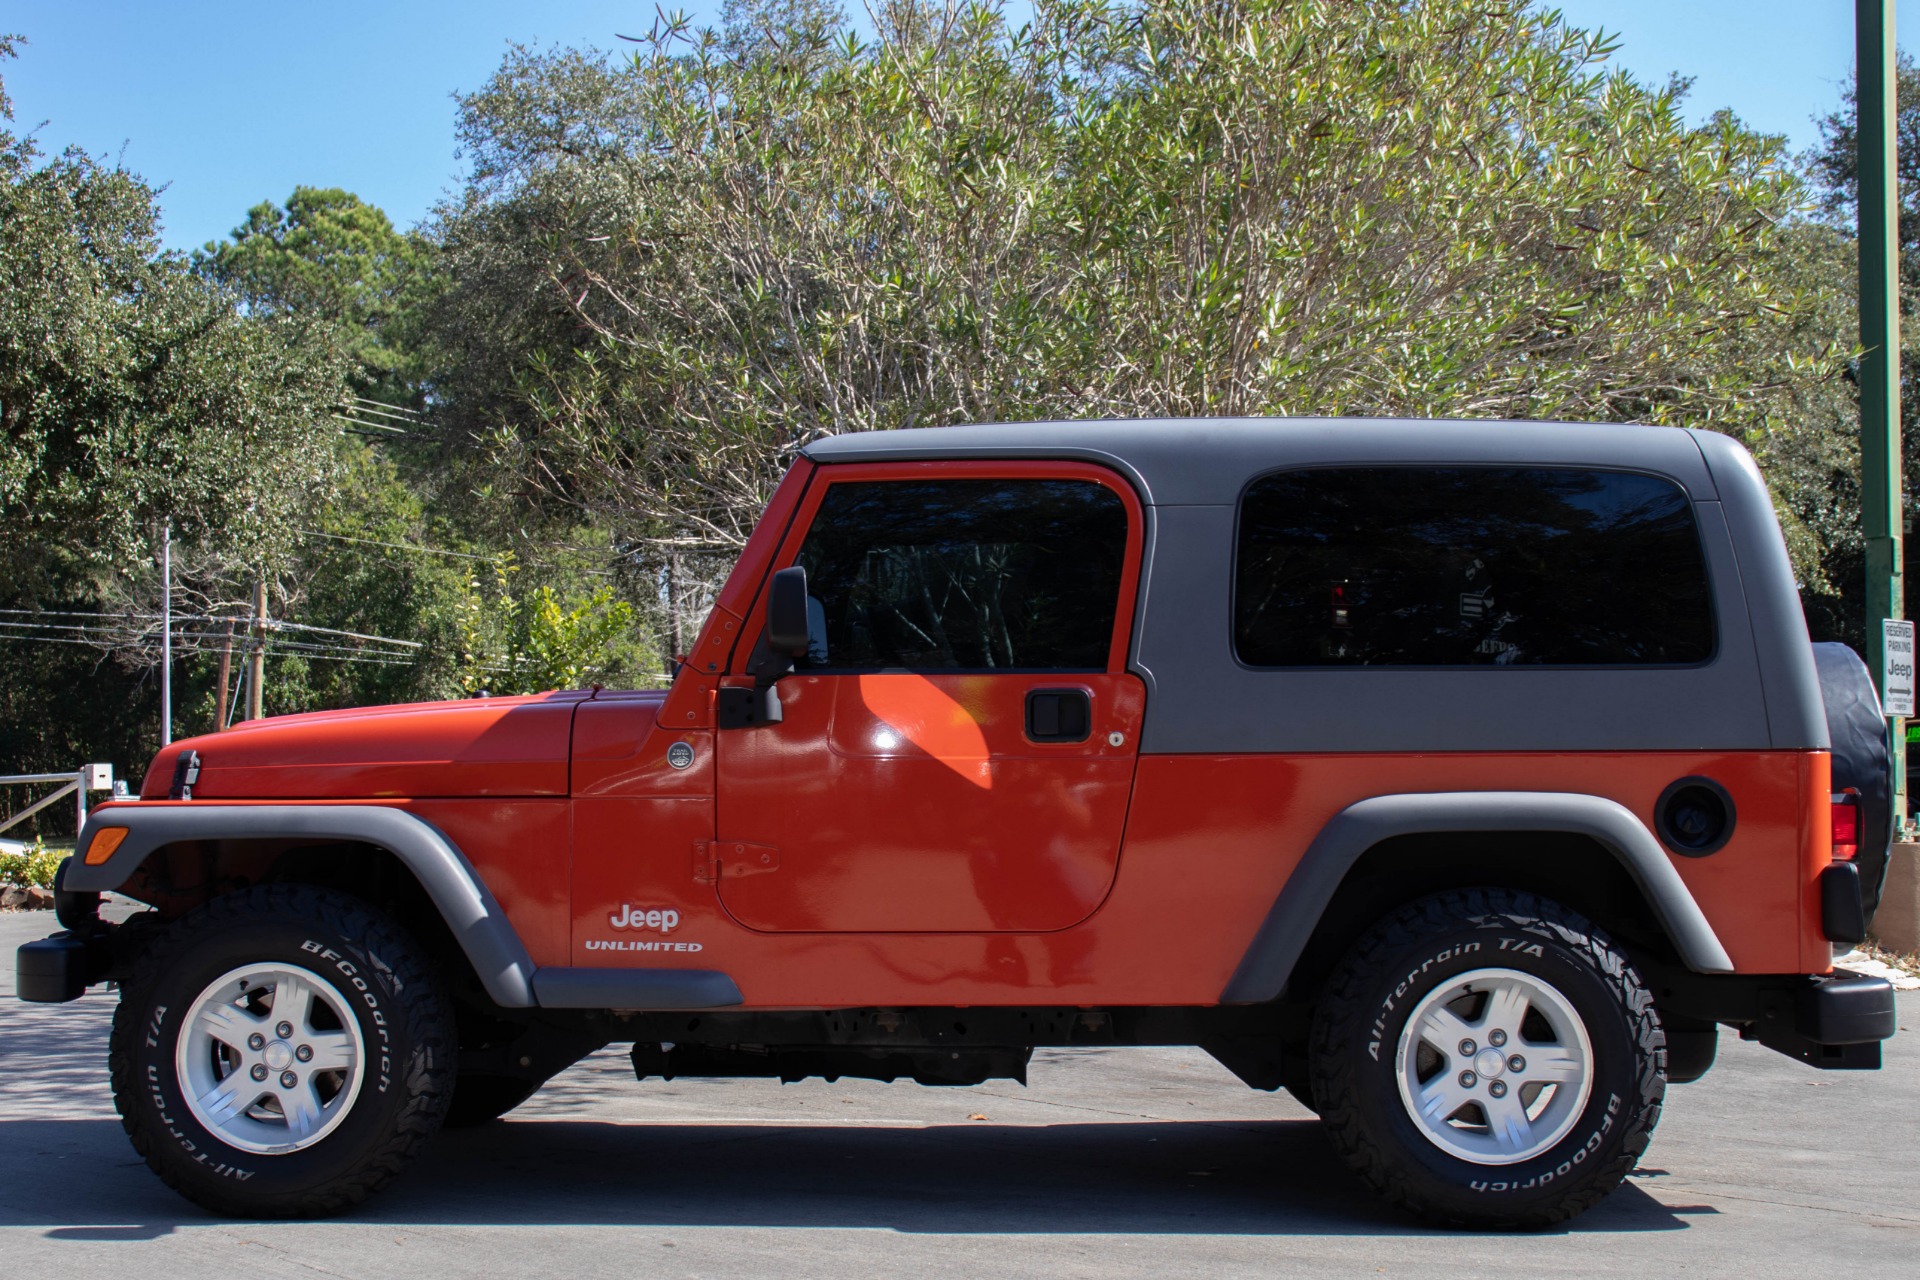 Used 2005 Jeep Wrangler Unlimited For Sale ($20,995) | Select Jeeps Inc.  Stock #312477